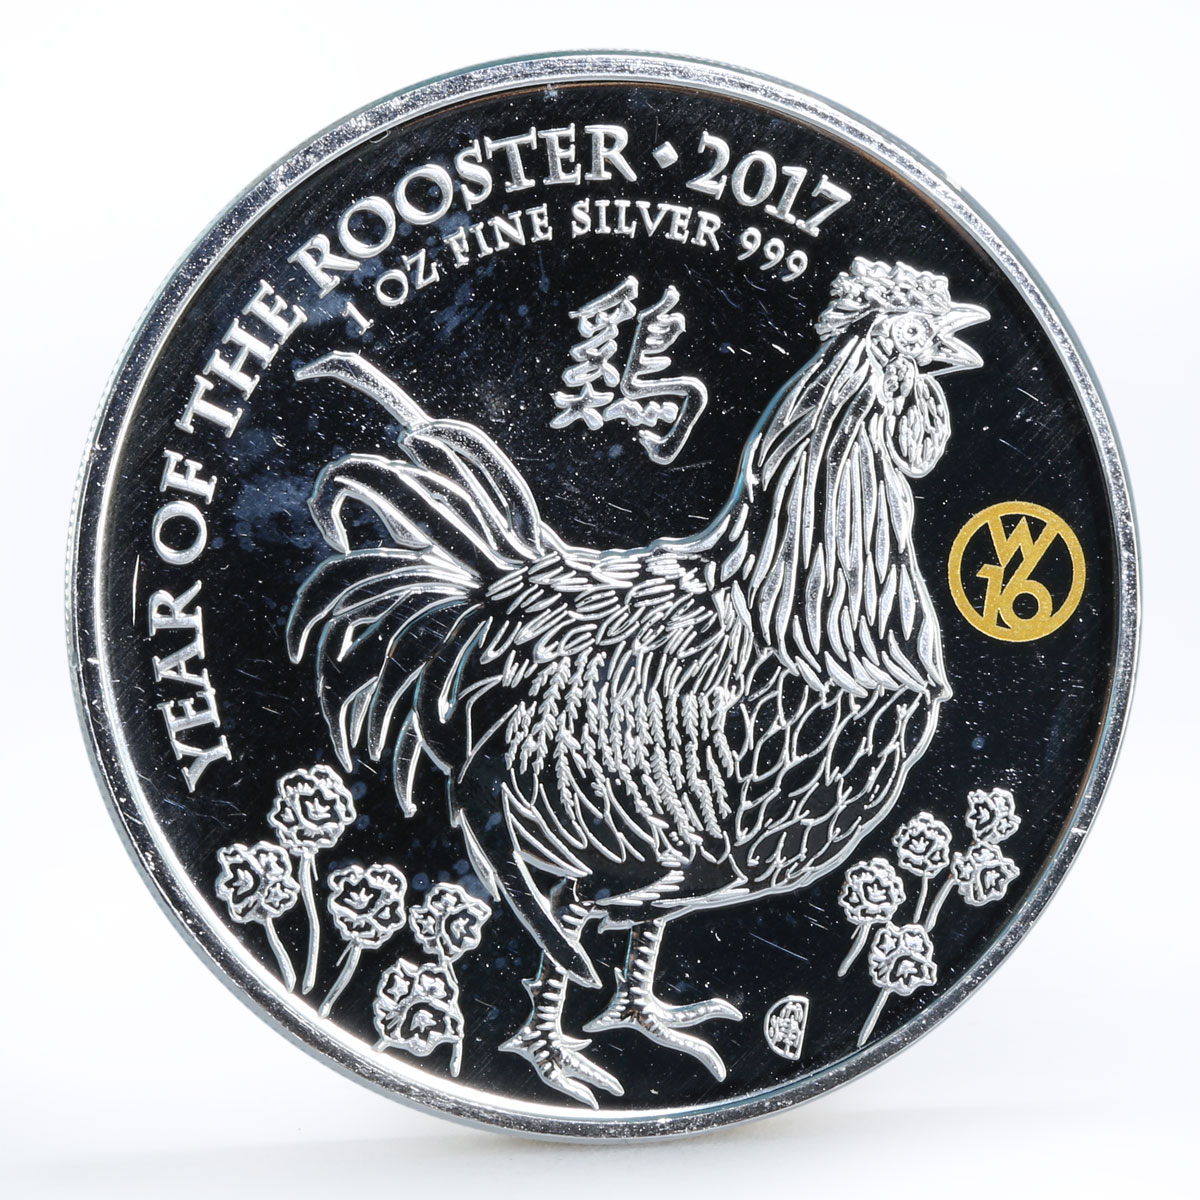 Britain 2 pounds Lunar Calendar series Year of the Rooster silver coin 2017